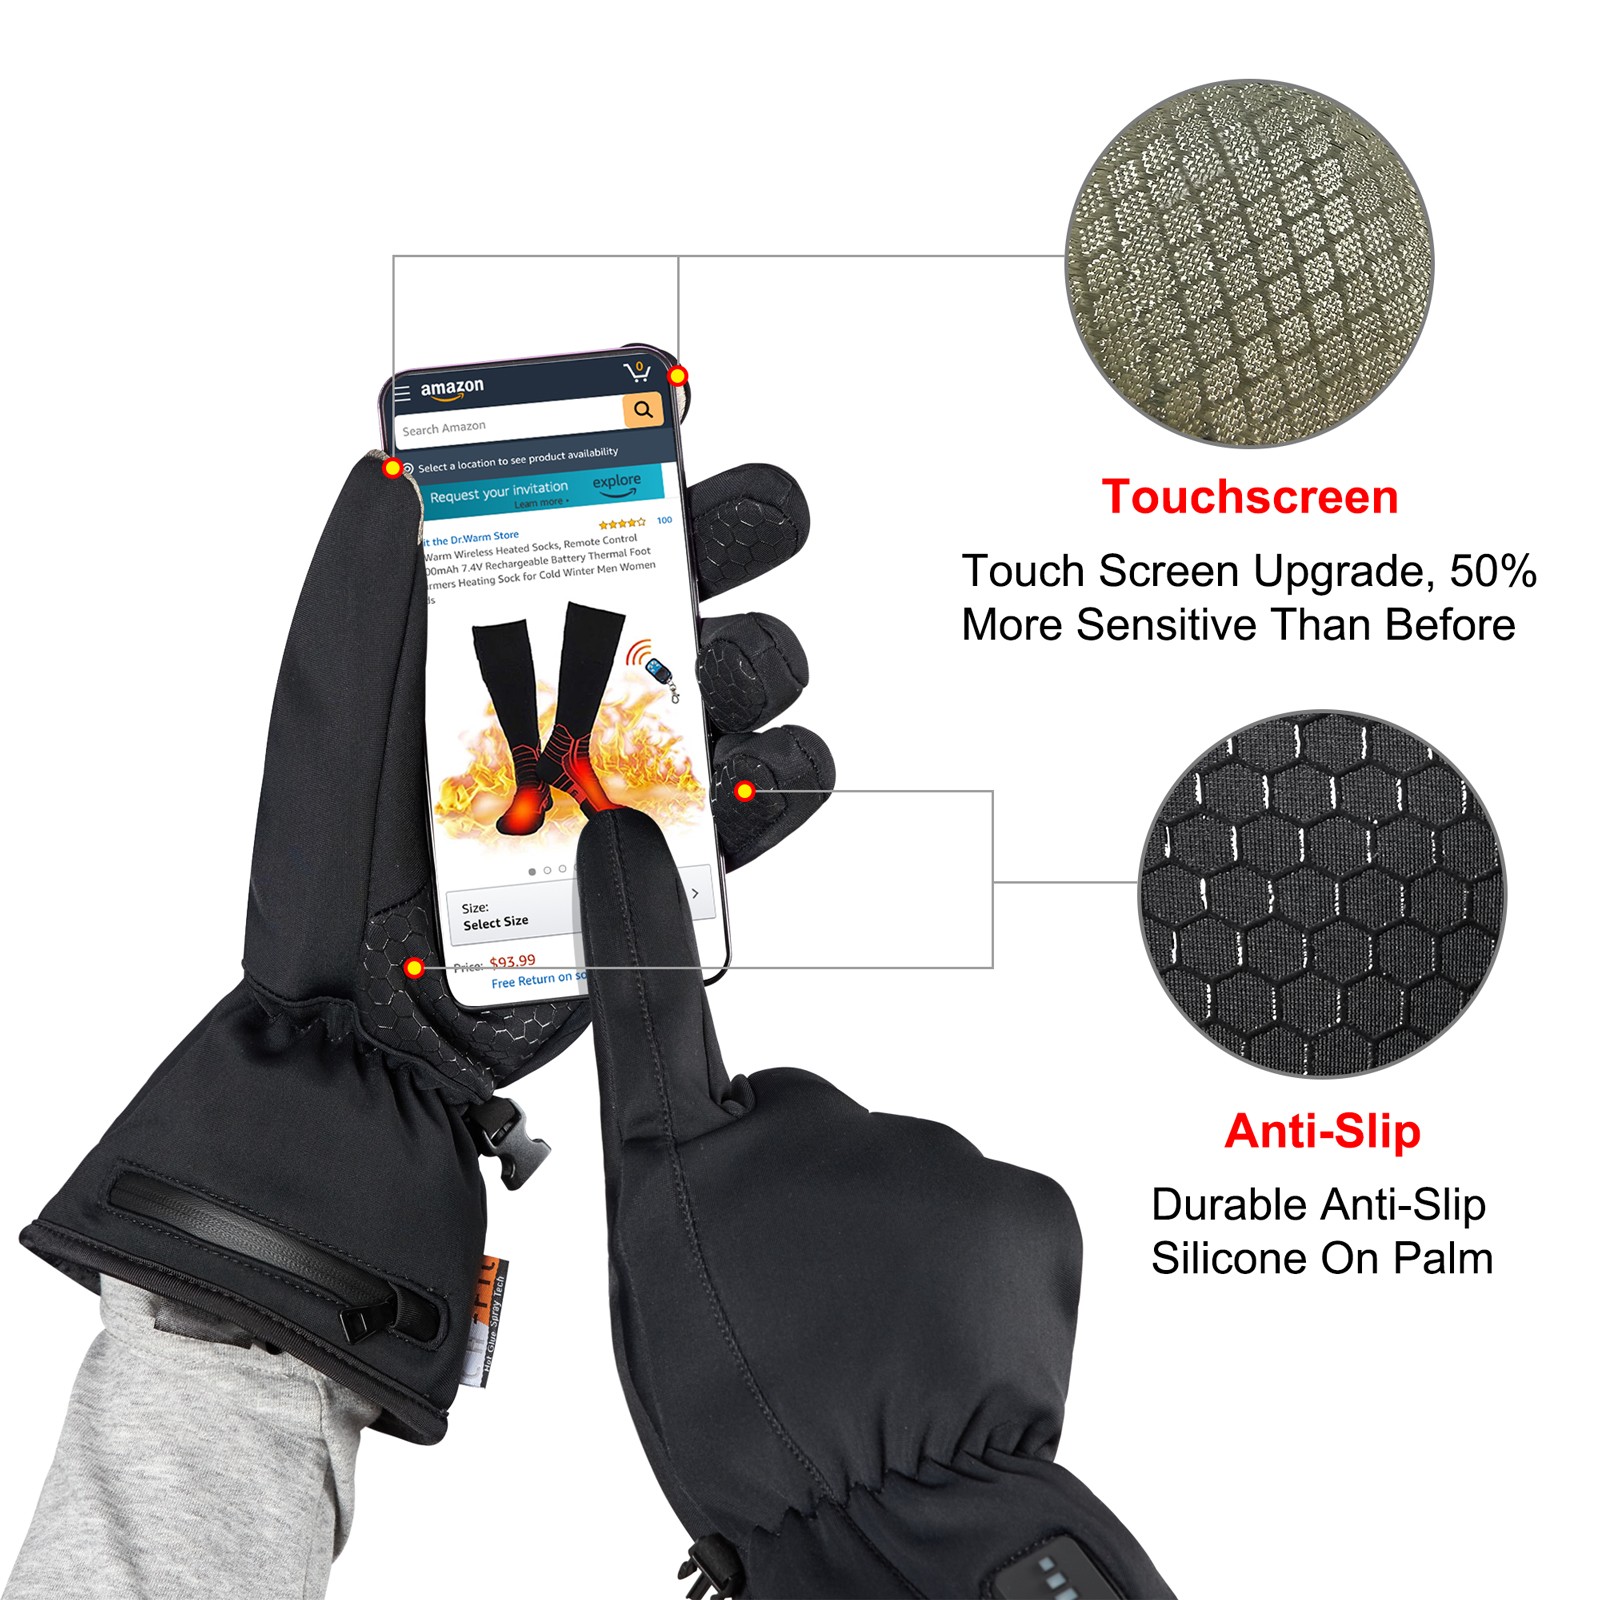 Dr. Warm high quality electrical hand gloves improves blood circulation for ice house-13